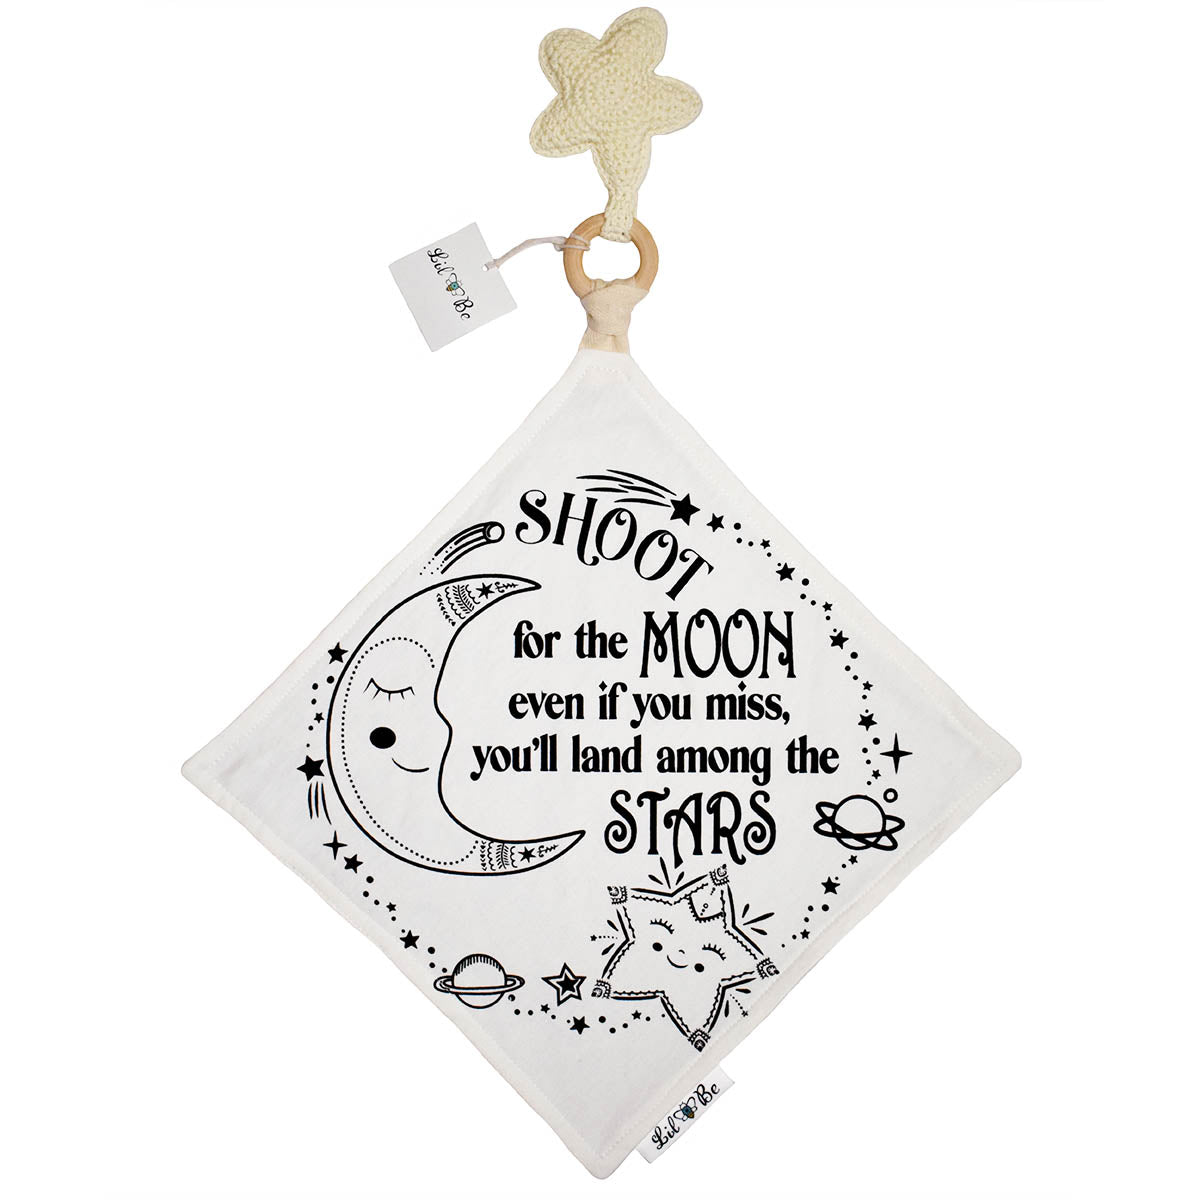 Star Crochet Teether with Shoot for the Moon Even if you miss, you'll land among the Stars Graphic on Mini Blanket